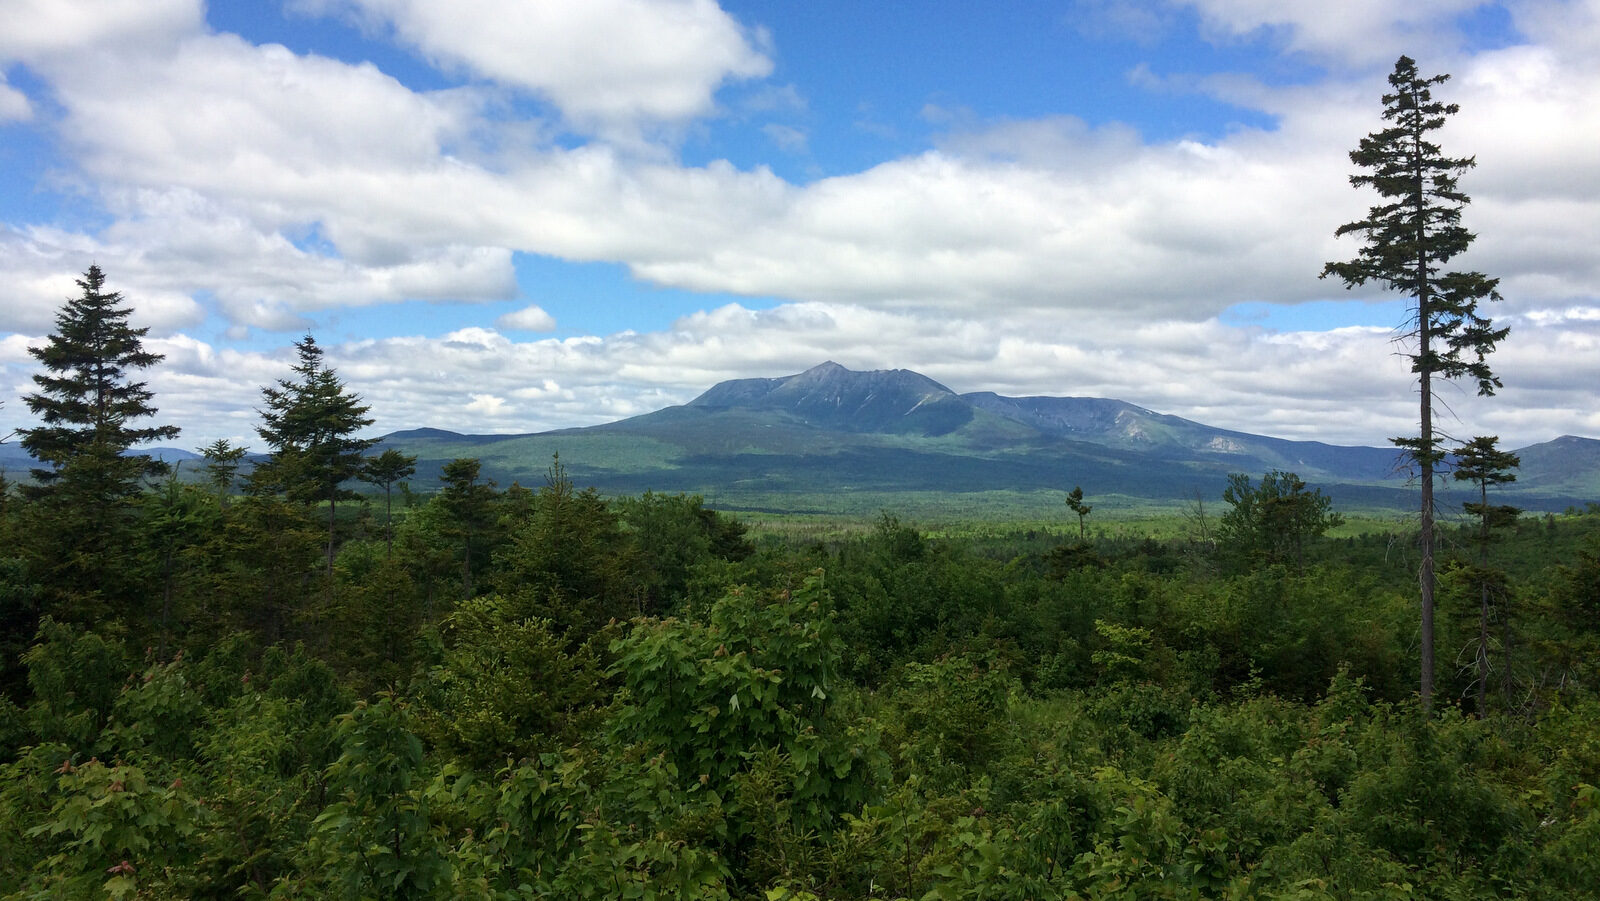 Mount Katahdin, the highest peak in Maine, is visible from some locations within the Katahdin Woods and Waters National Monument. The Katahdin monument is one of the 27 under threat by Trump's executive order. (AP/Patrick Whittle)